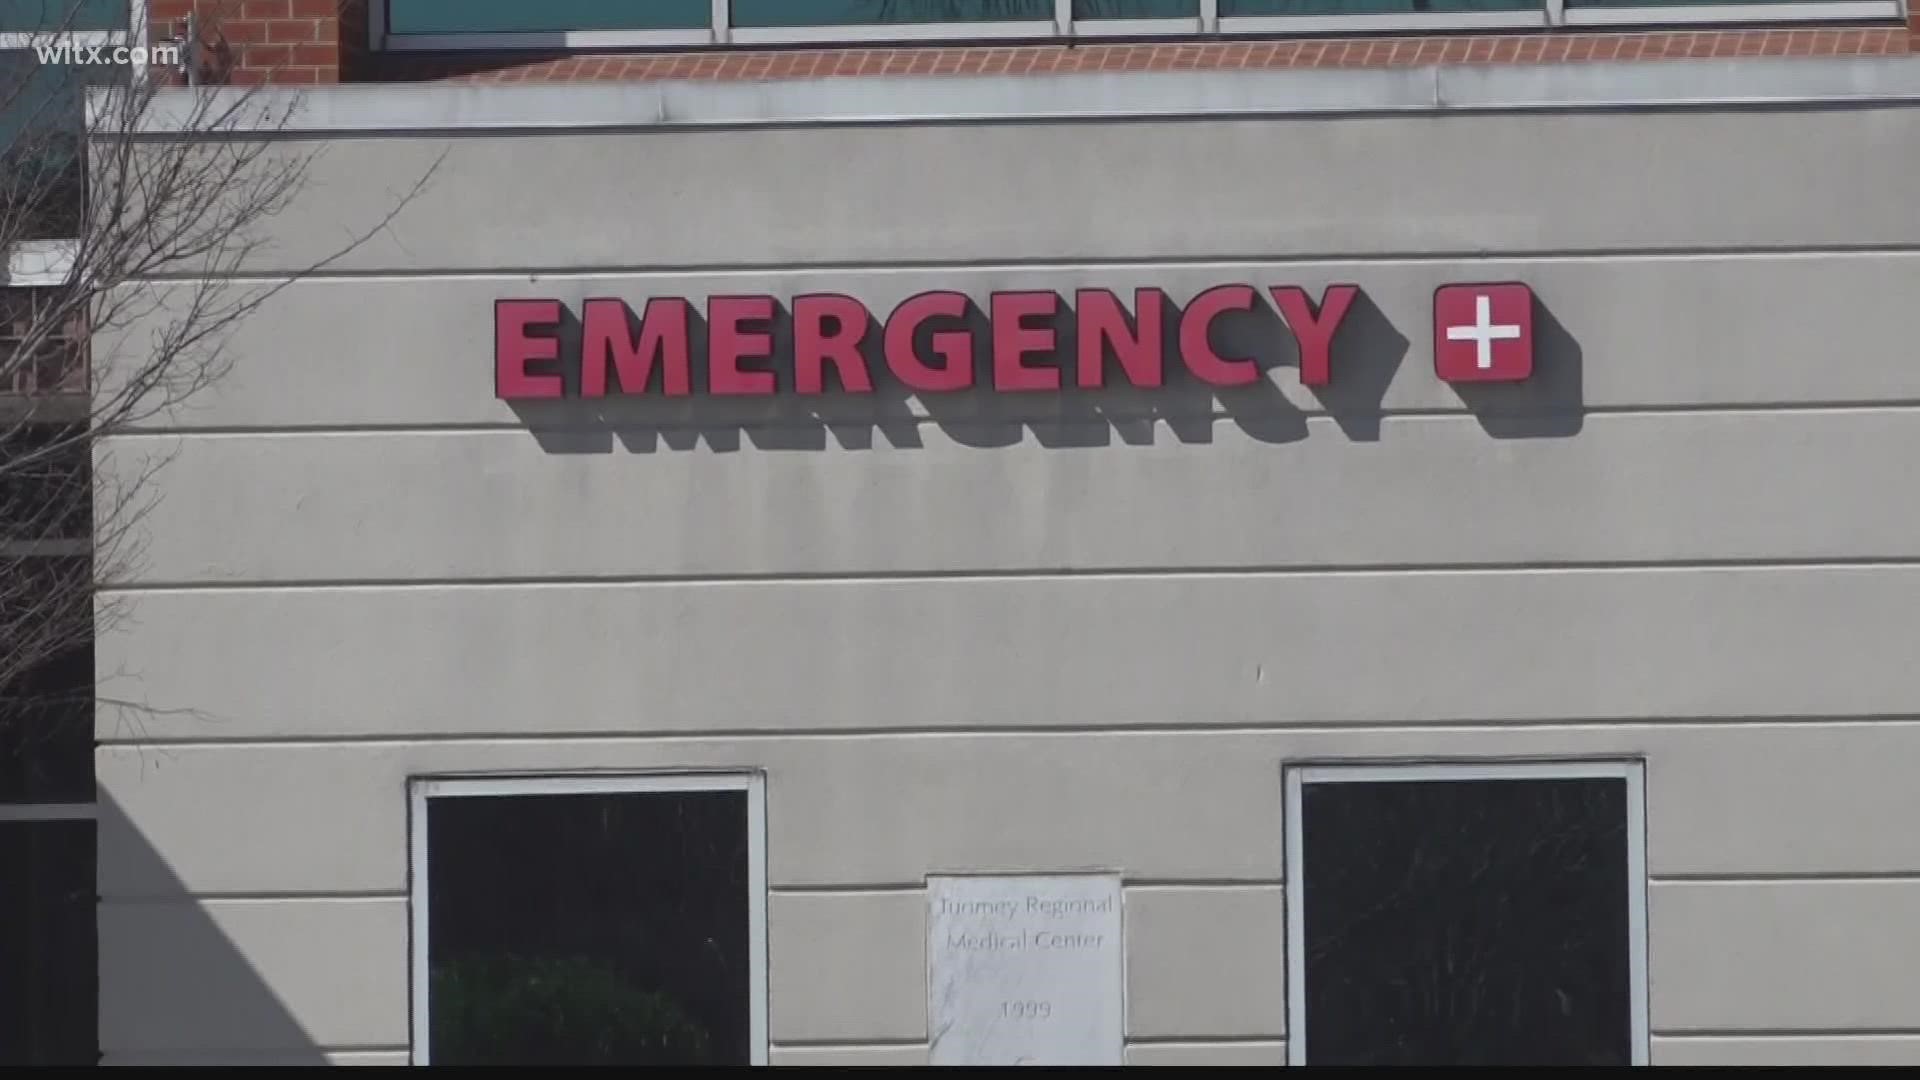 Millions of dollars are going to two more rural communities in the Midlands to help expand healthcare and emergency services.